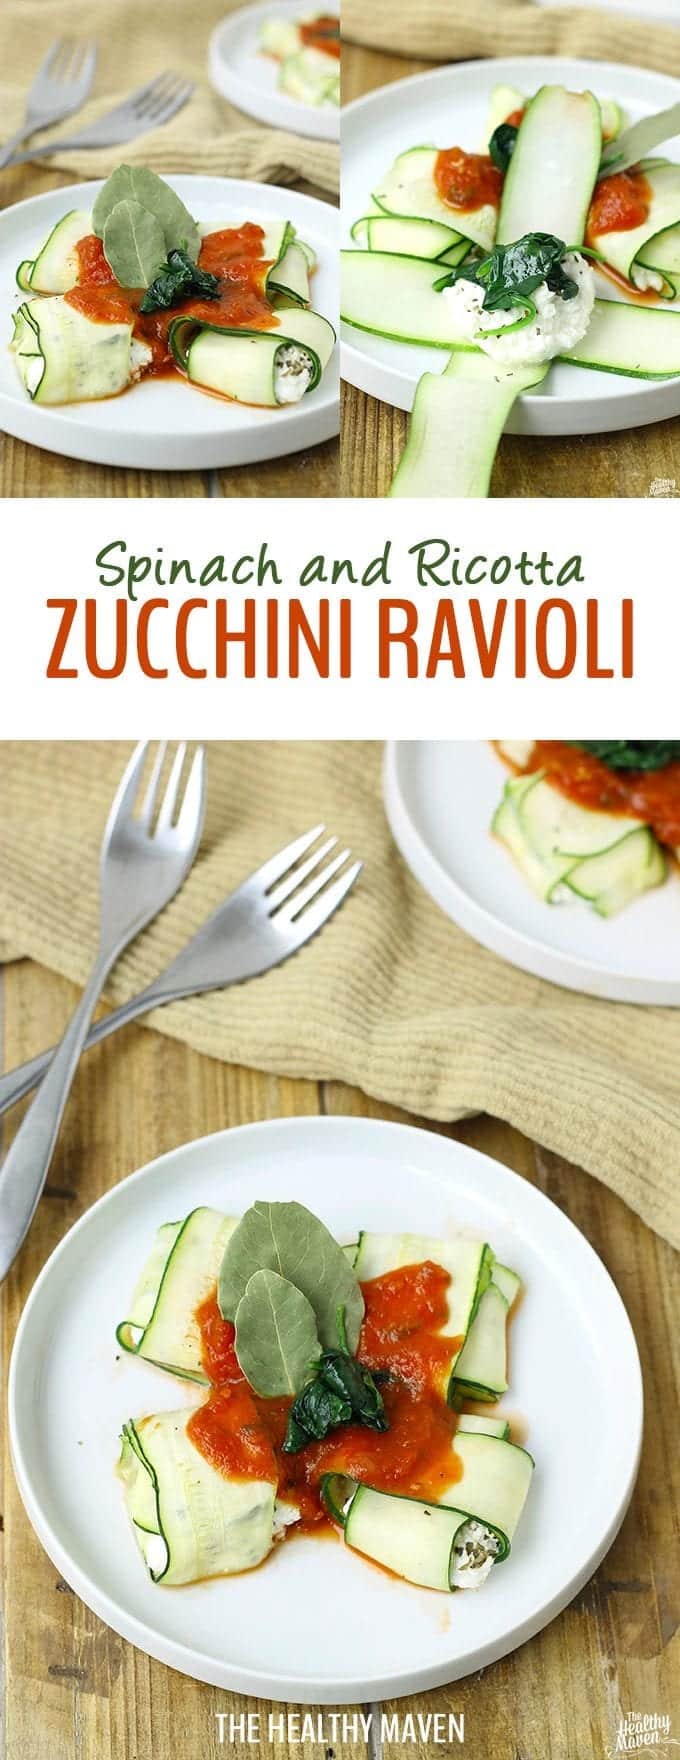 Spinach and Ricotta Zucchini Ravioli - a healthy, veggie swap for traditional pasta! This recipe makes a great low-carb dinner with an extra veggie punch.